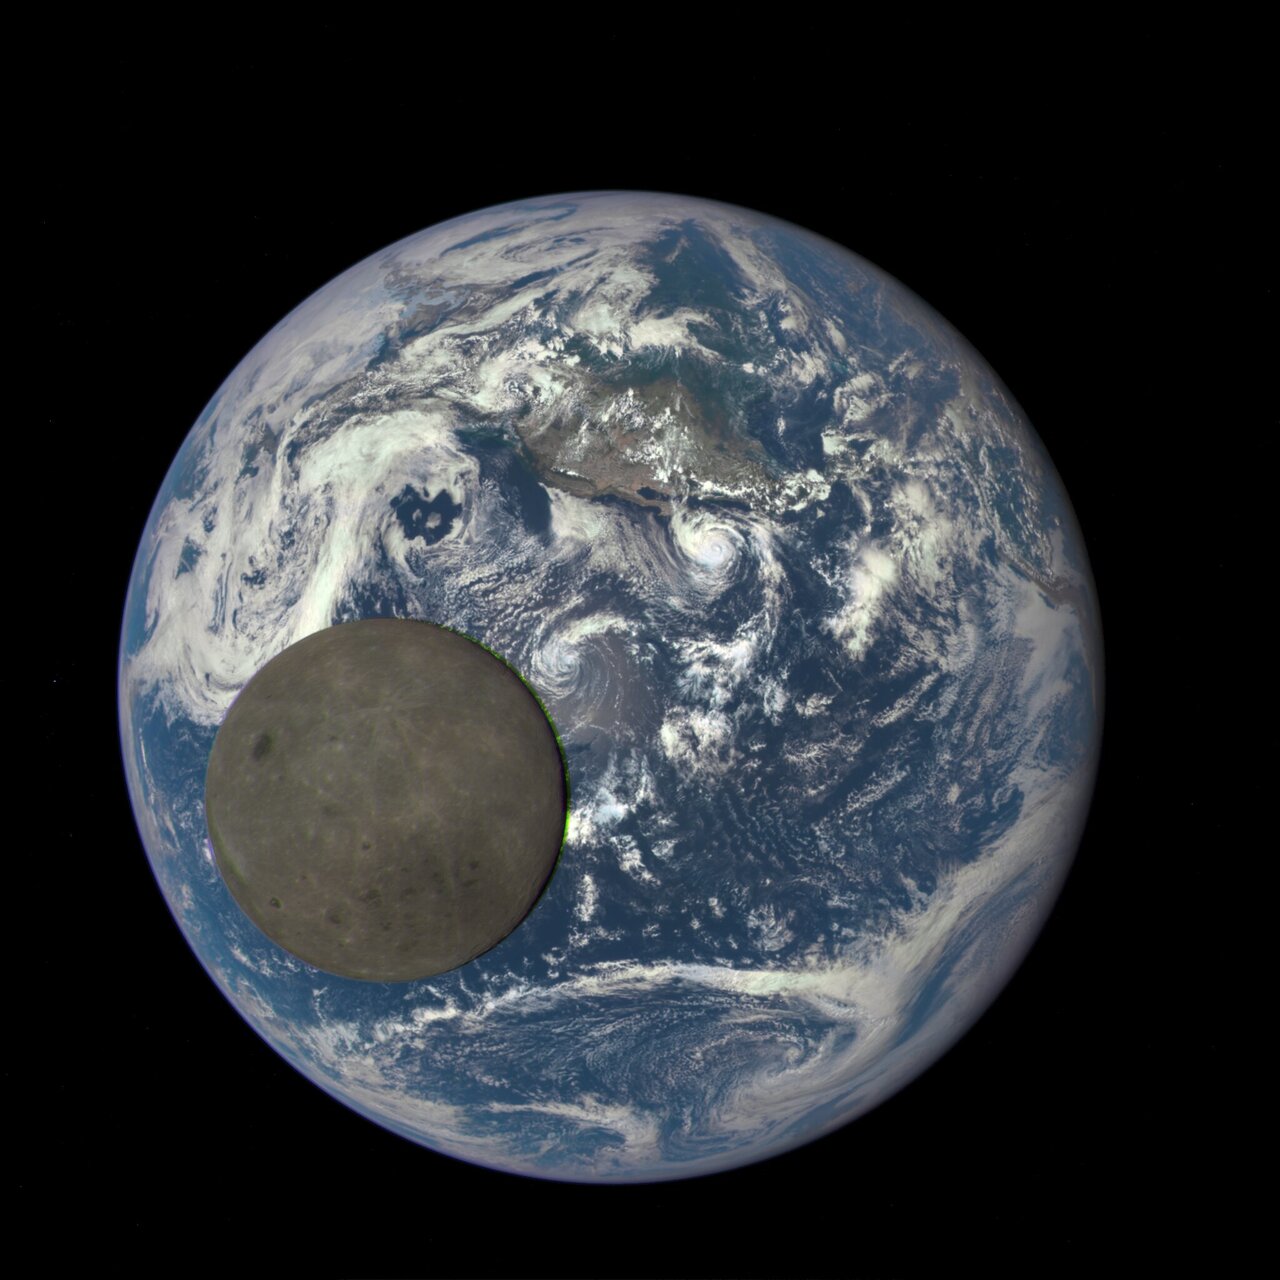 Scientists provide new explanation for the strange asymmetry of the moon